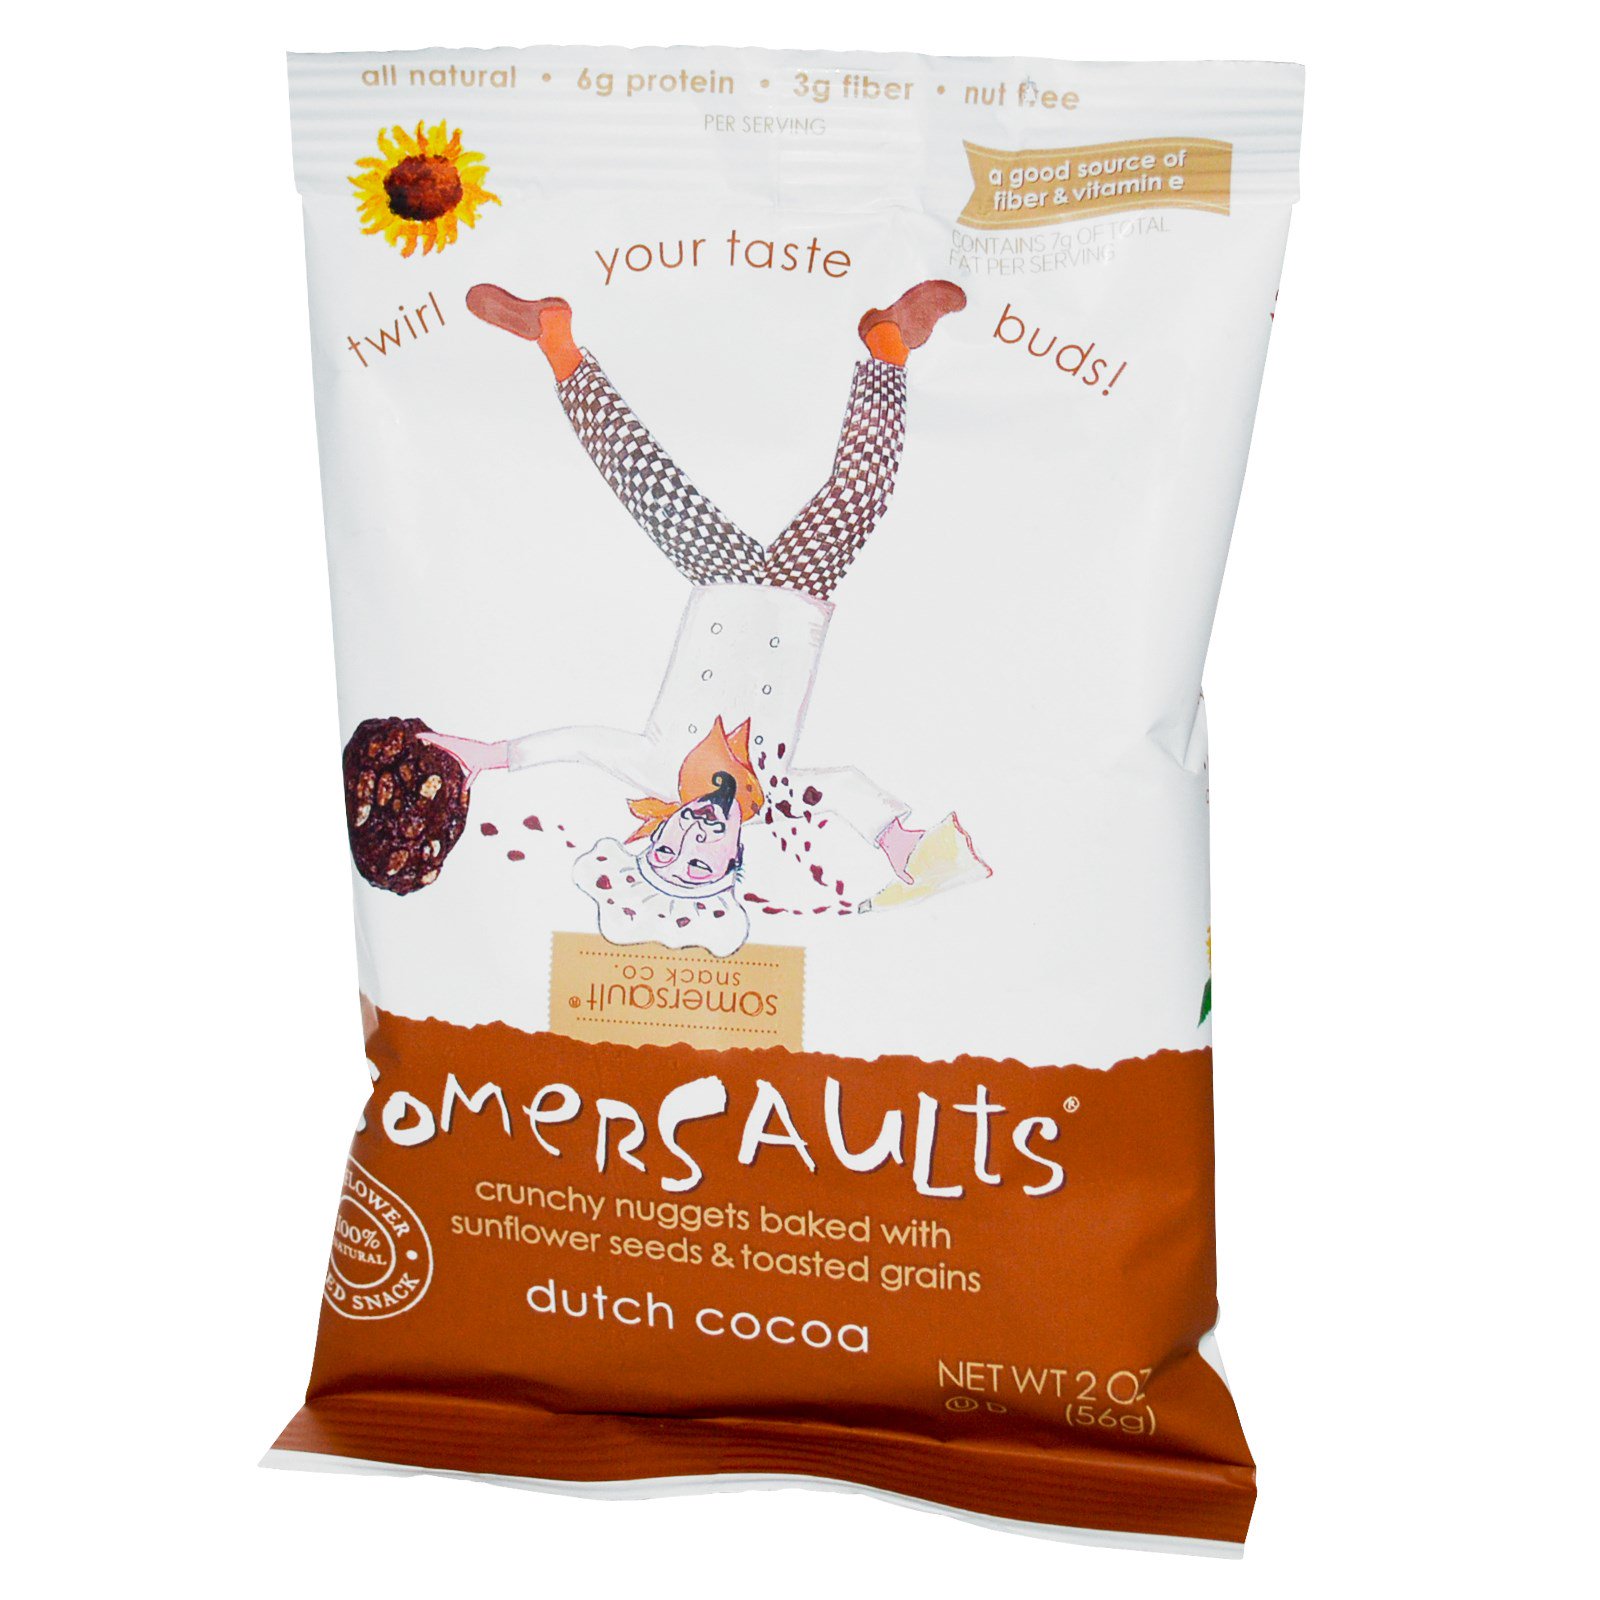 somersaults, sunflower seed snack, dutch cocoa, 8